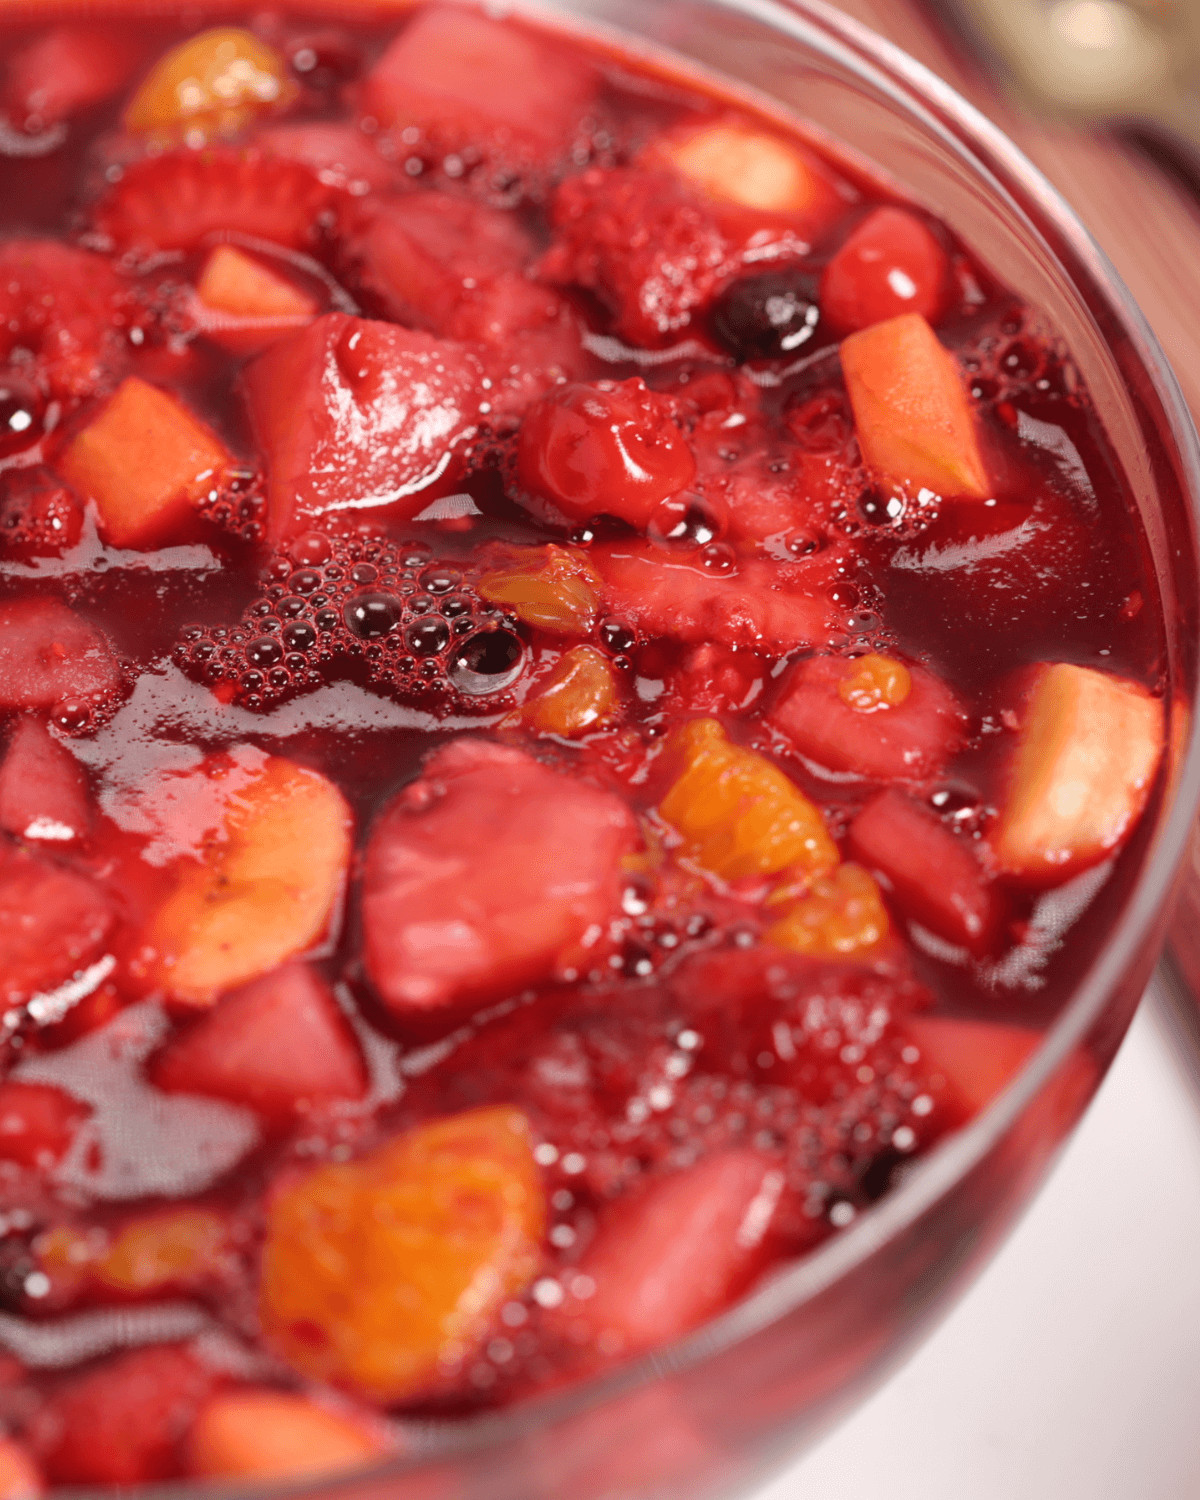 A large bowl of the cherry jello salad with fruit.